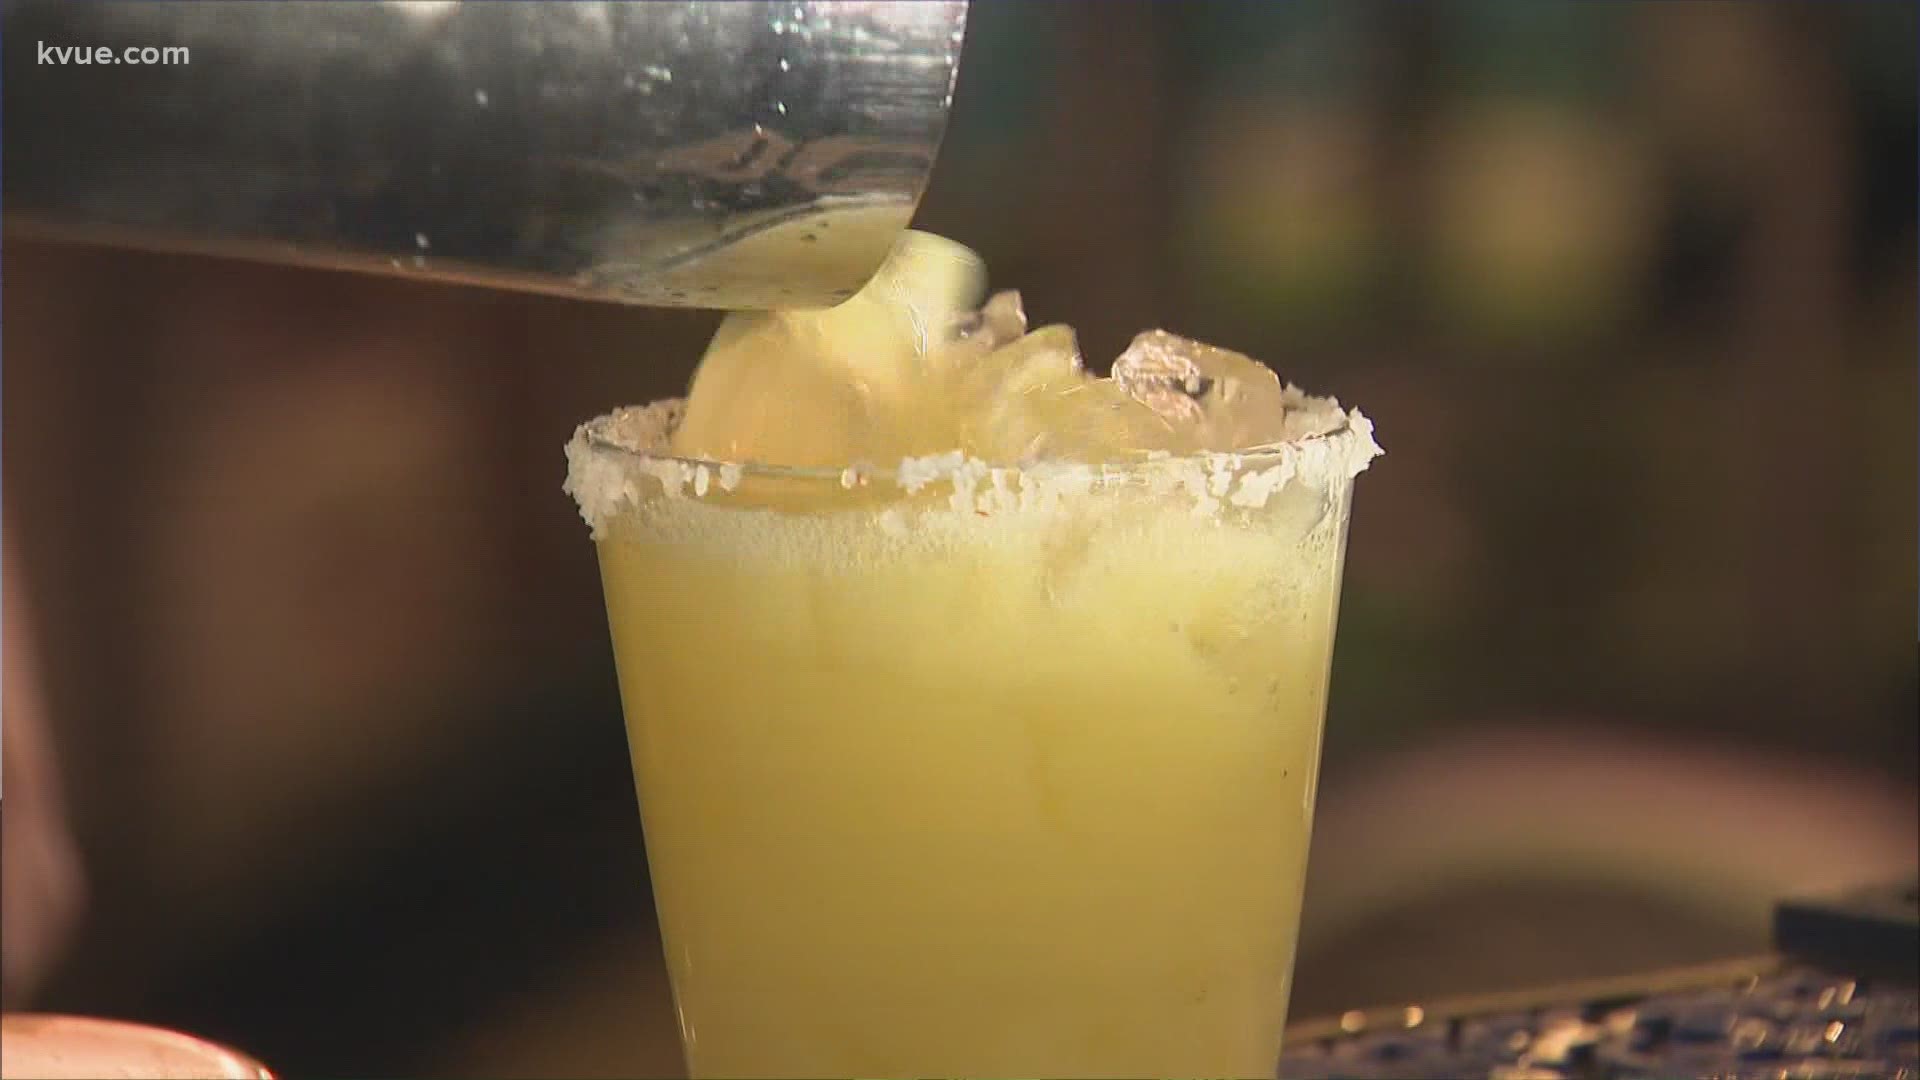 After a pandemic that's lasted over a year, local restaurants have been looking forward to this year's Cinco de Mayo.